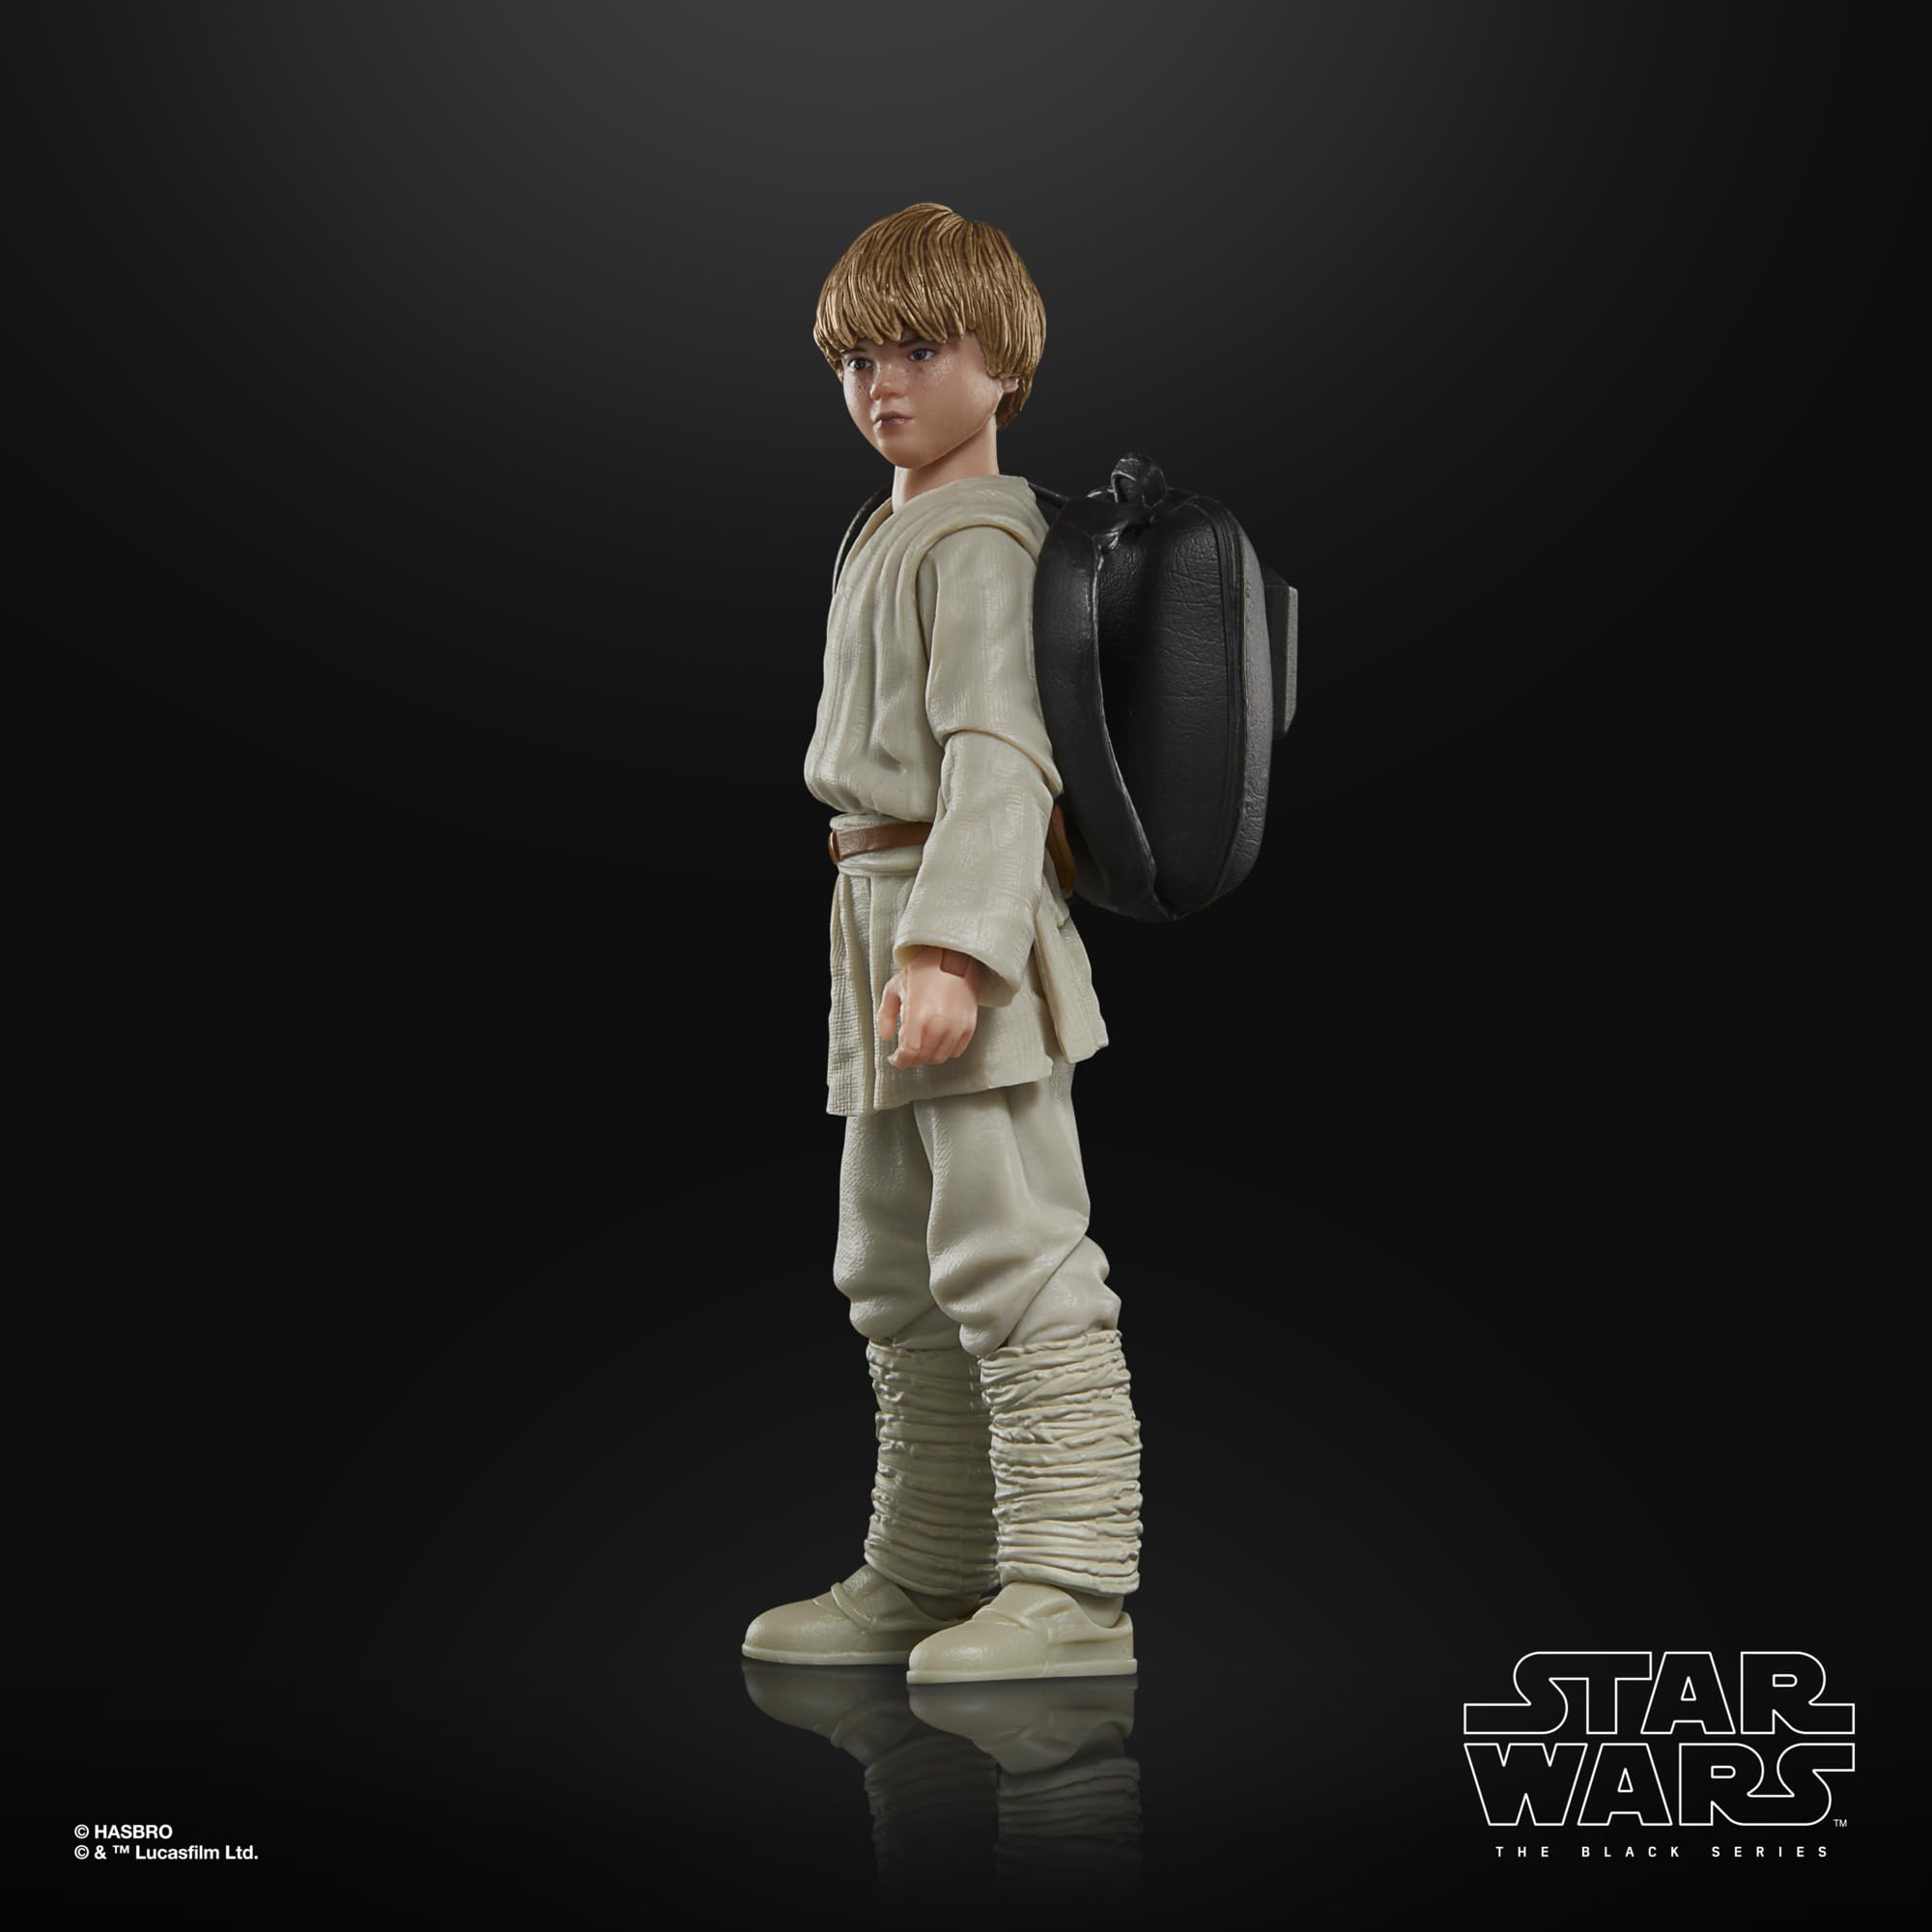 STAR WARS The Black Series Anakin Skywalker, The Phantom Menace Collectible 6-Inch Action Figure, Ages 4 and Up